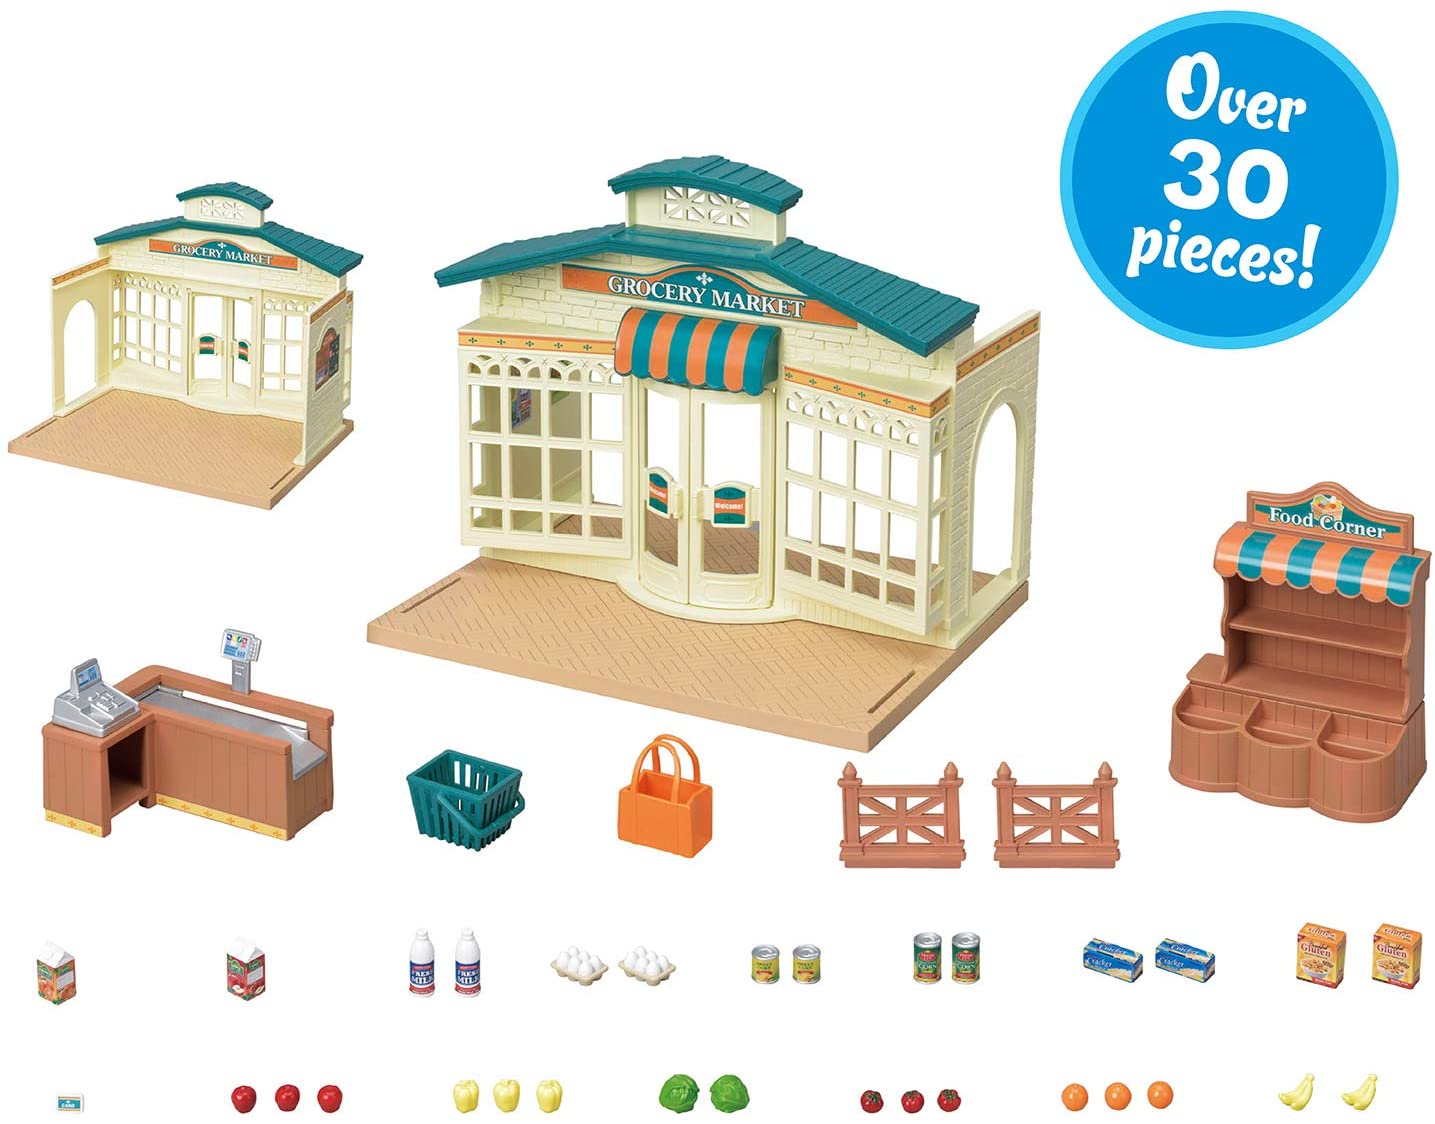 Grocery Market by Calico Critters #CC1788